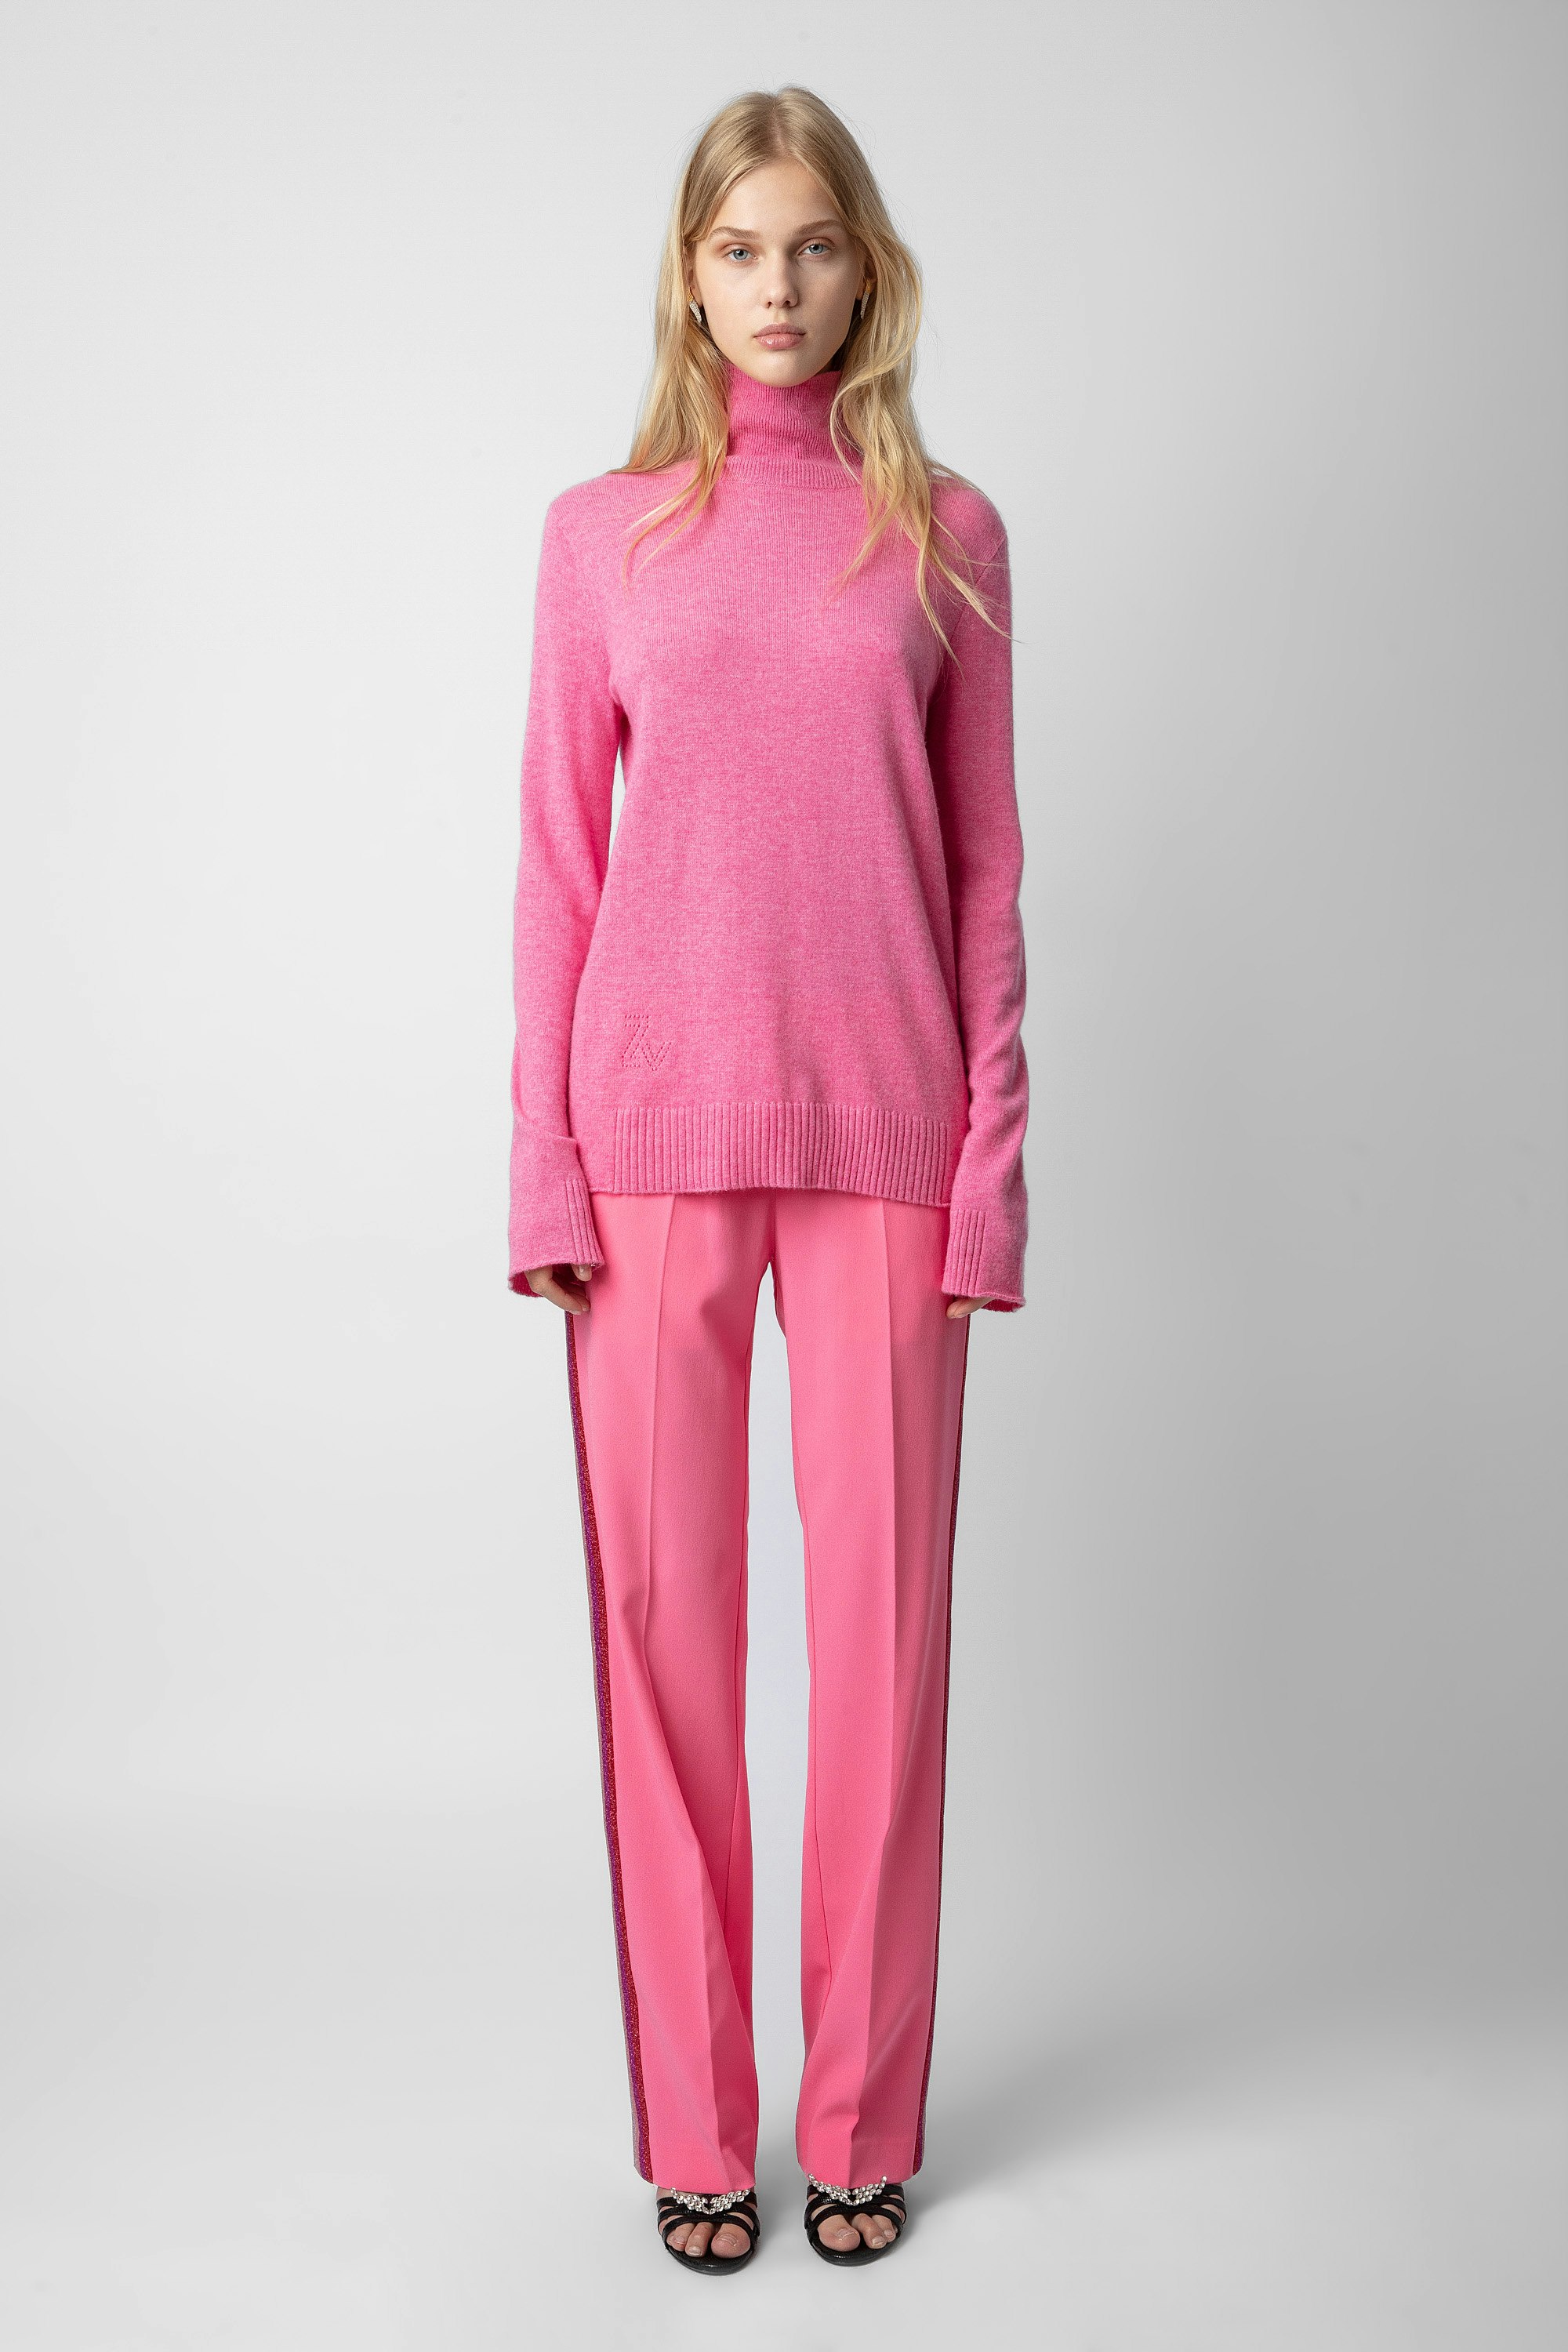 Ginny Patch Cashmere Jumper - Women’s pink cashmere jumper with mock neckline and star patches on the sleeves.